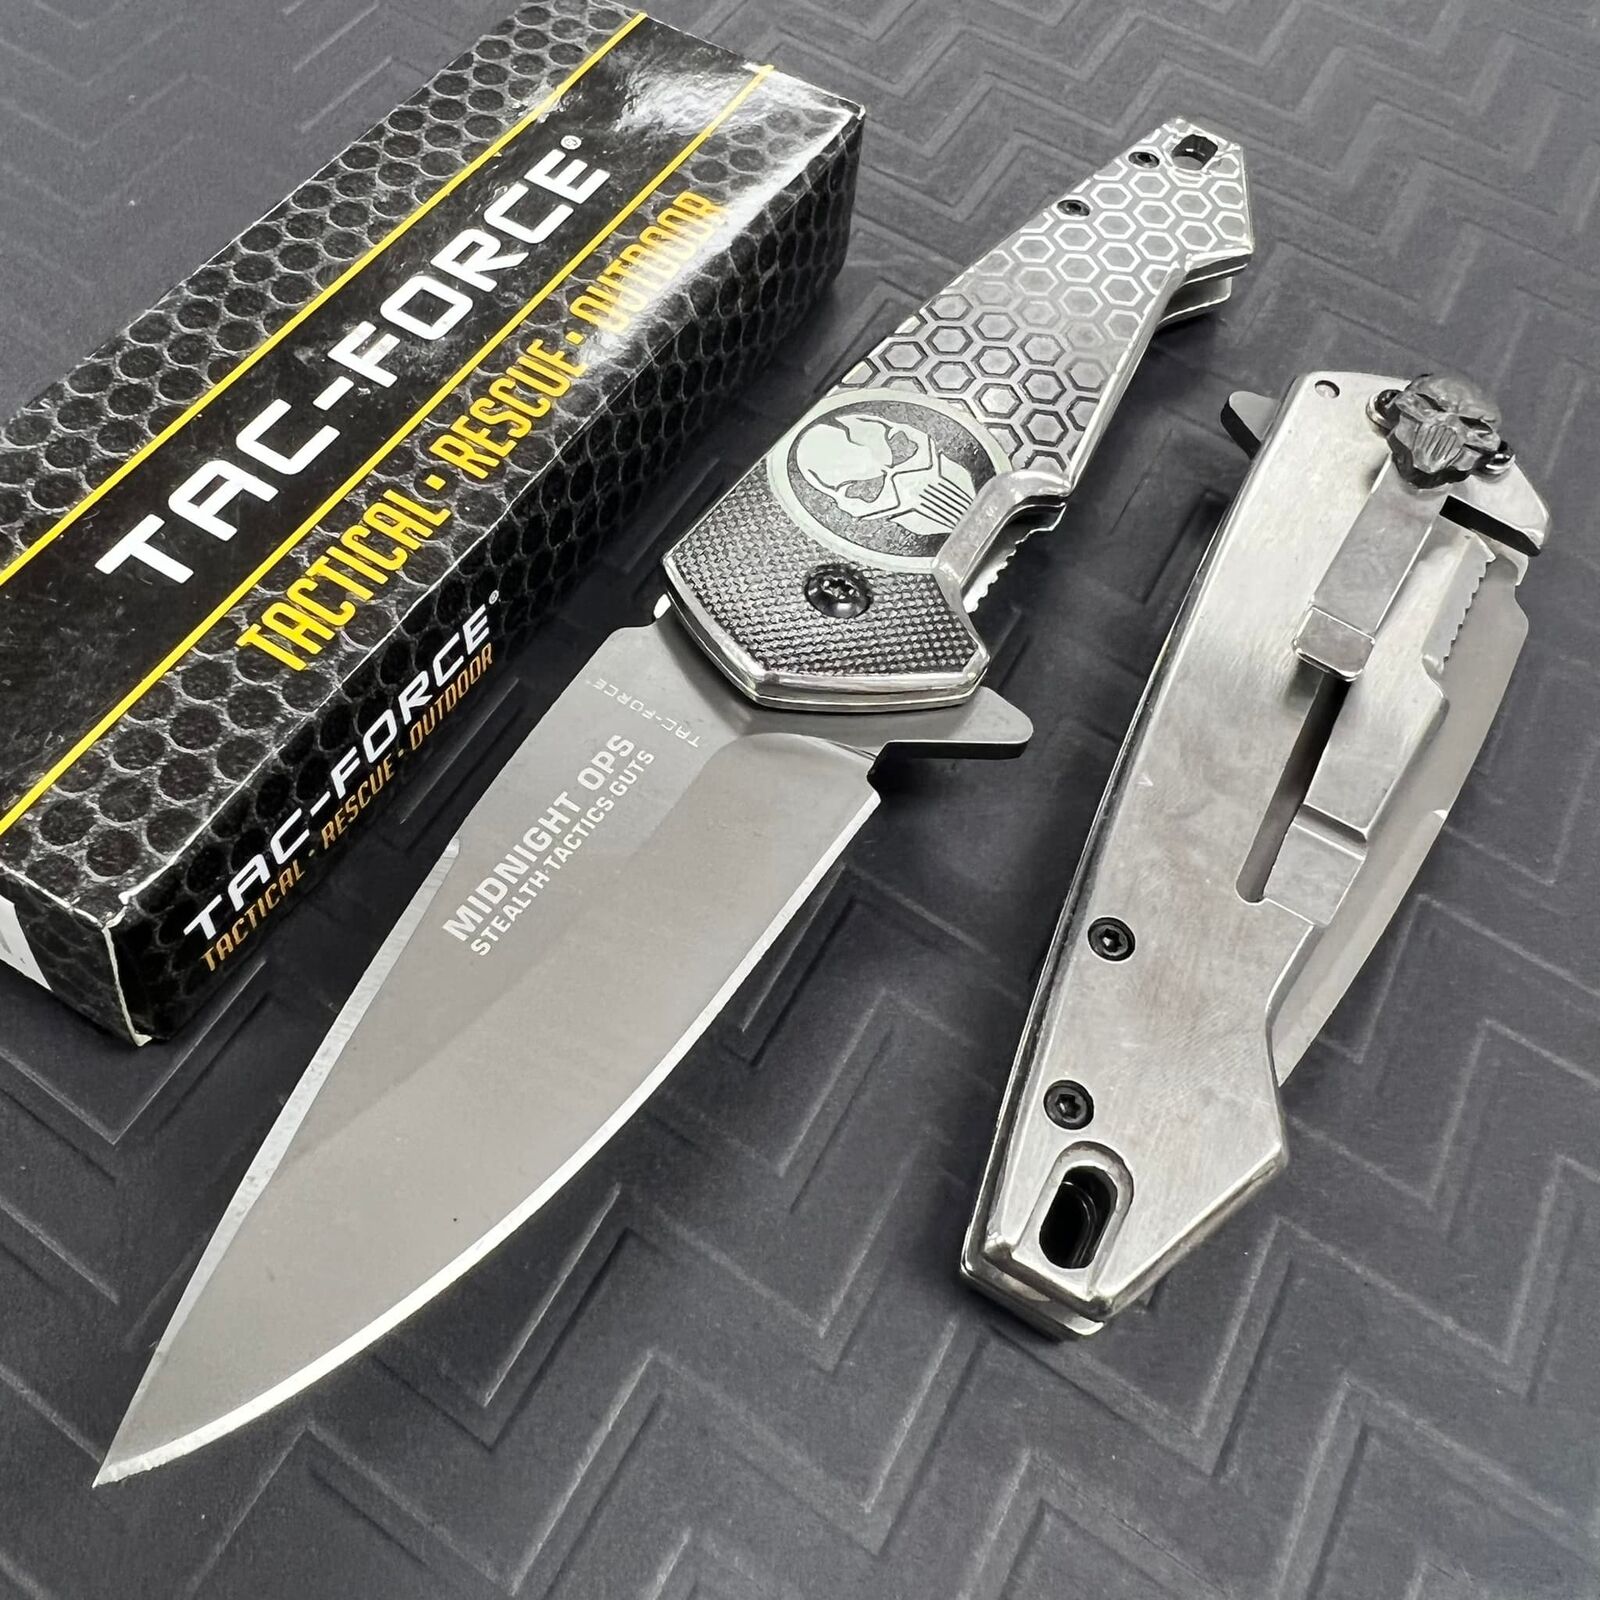 Tac Force Spring Assisted 3CR13 STEEL BLADE STAINLESS STEEL HANDLE 7.75\